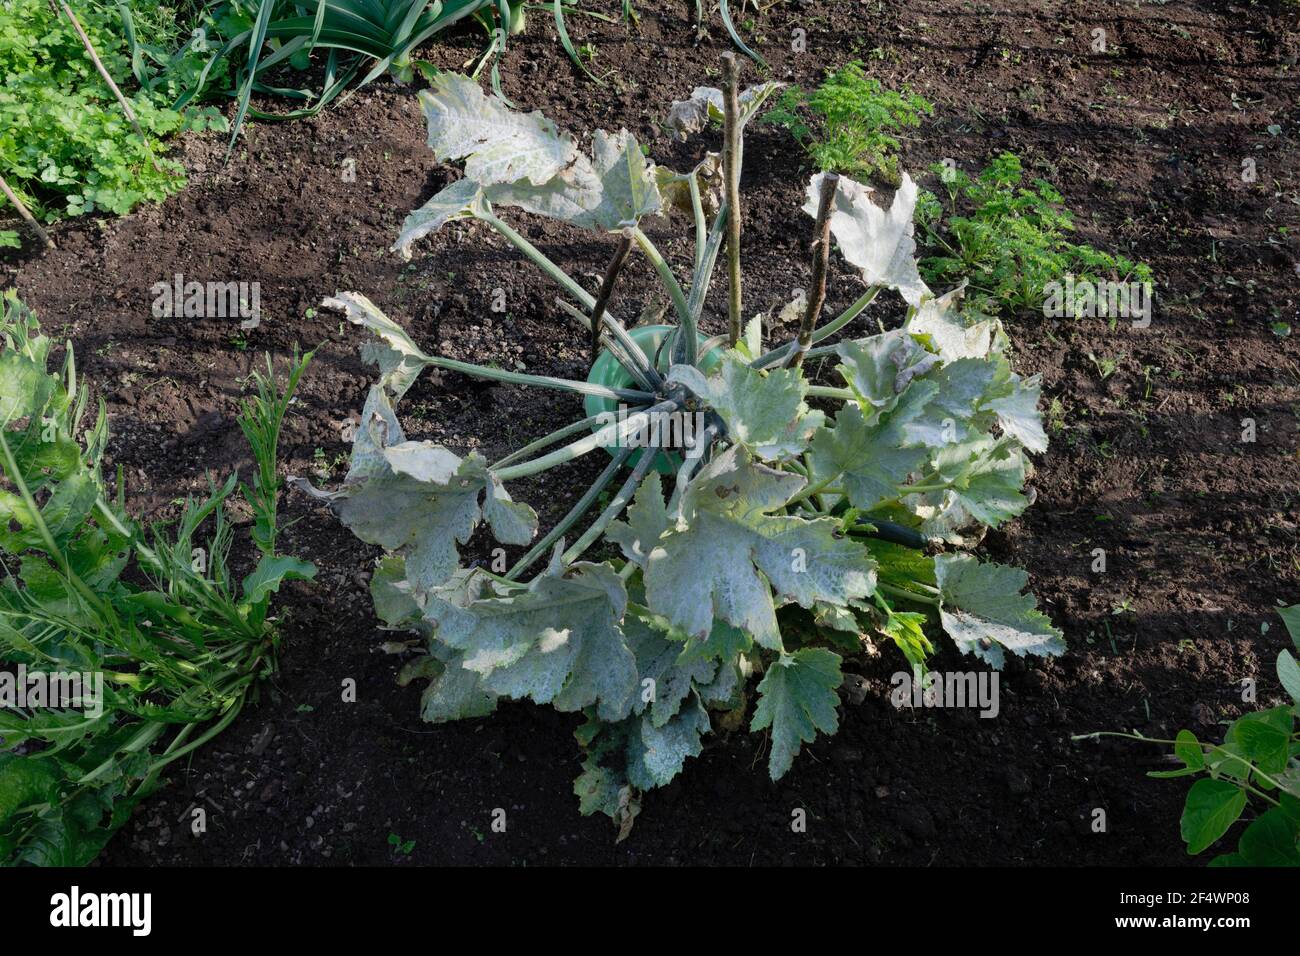 Courgette (zucchini) plant in vegetable garden, leaves and stems covered with white powdery mildew. Stock Photo